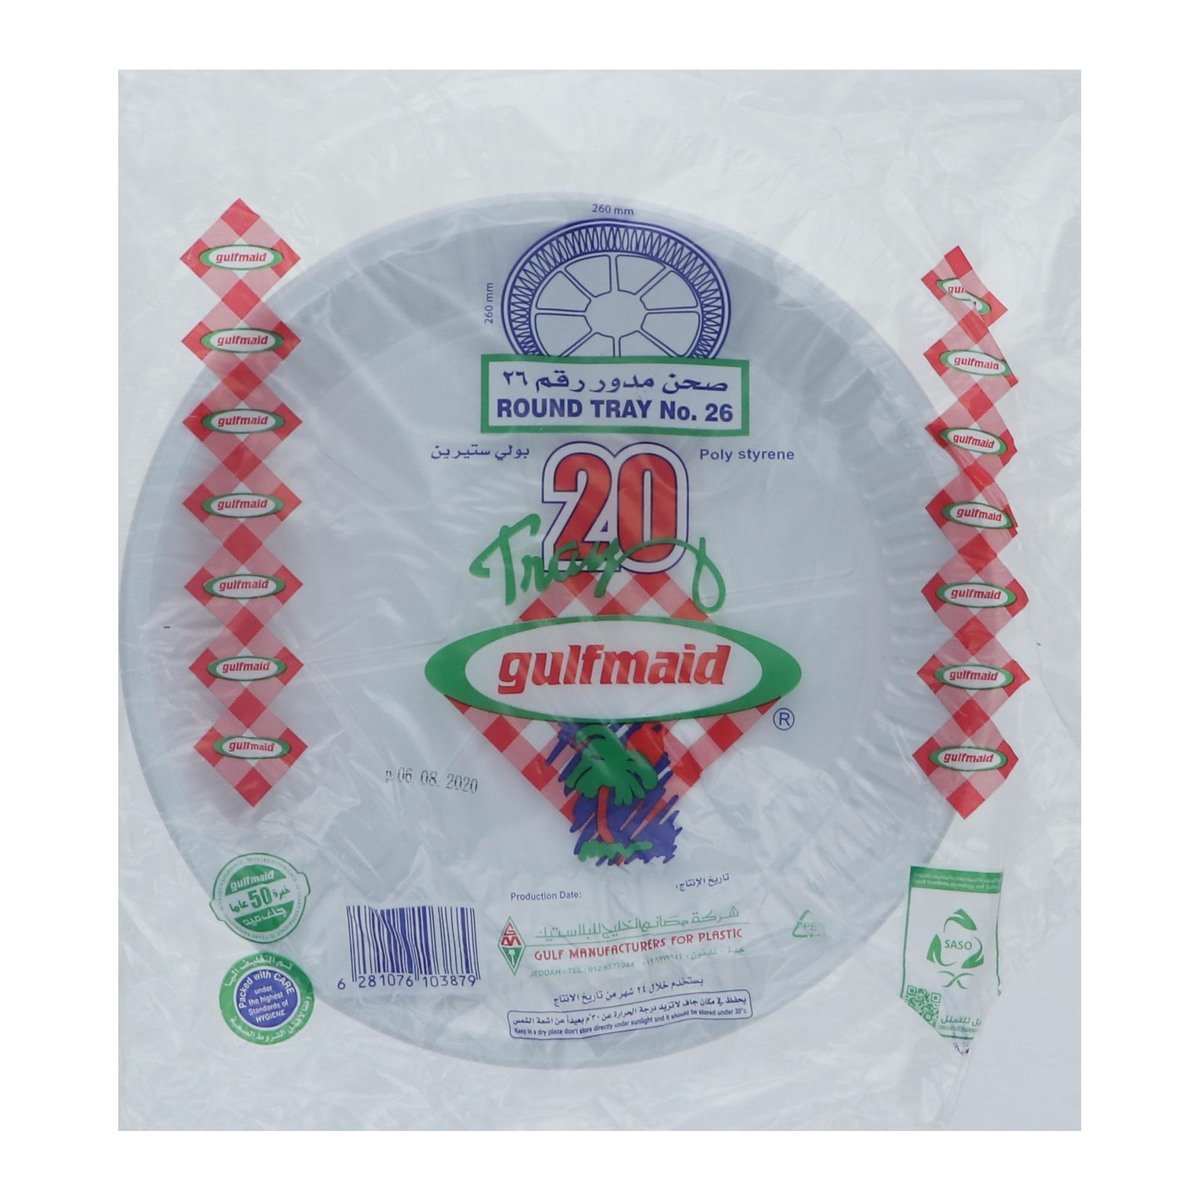 Gulfmaid Disposable Round Tray No.26 20pcs